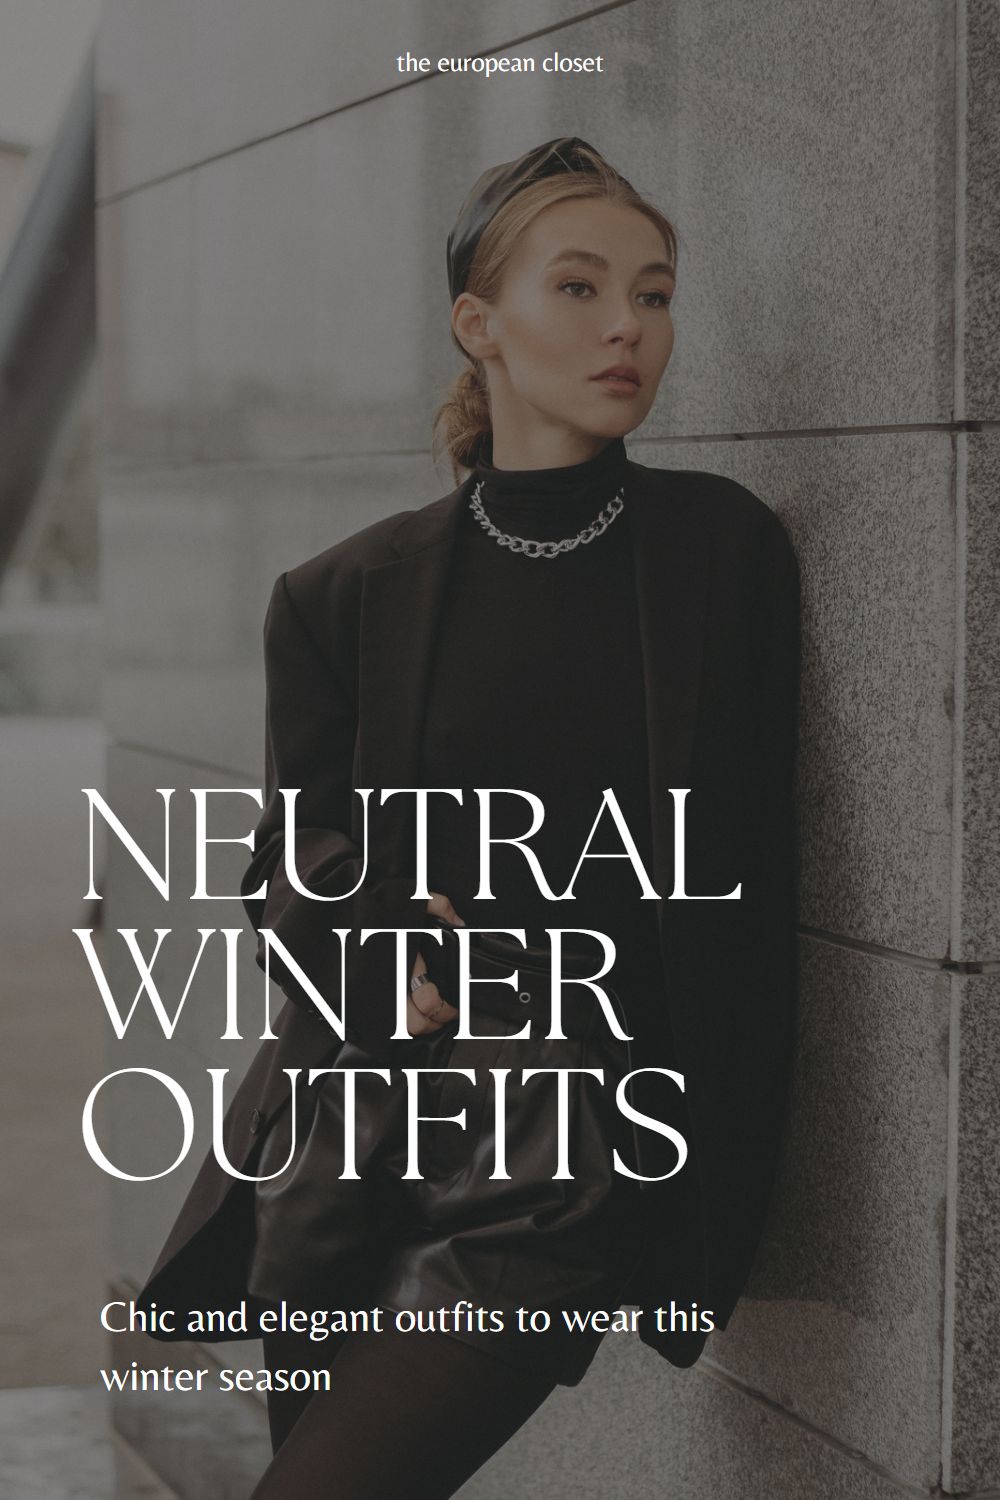 8 Neutral Winter Outfits To Keep You Warm | The European Closet